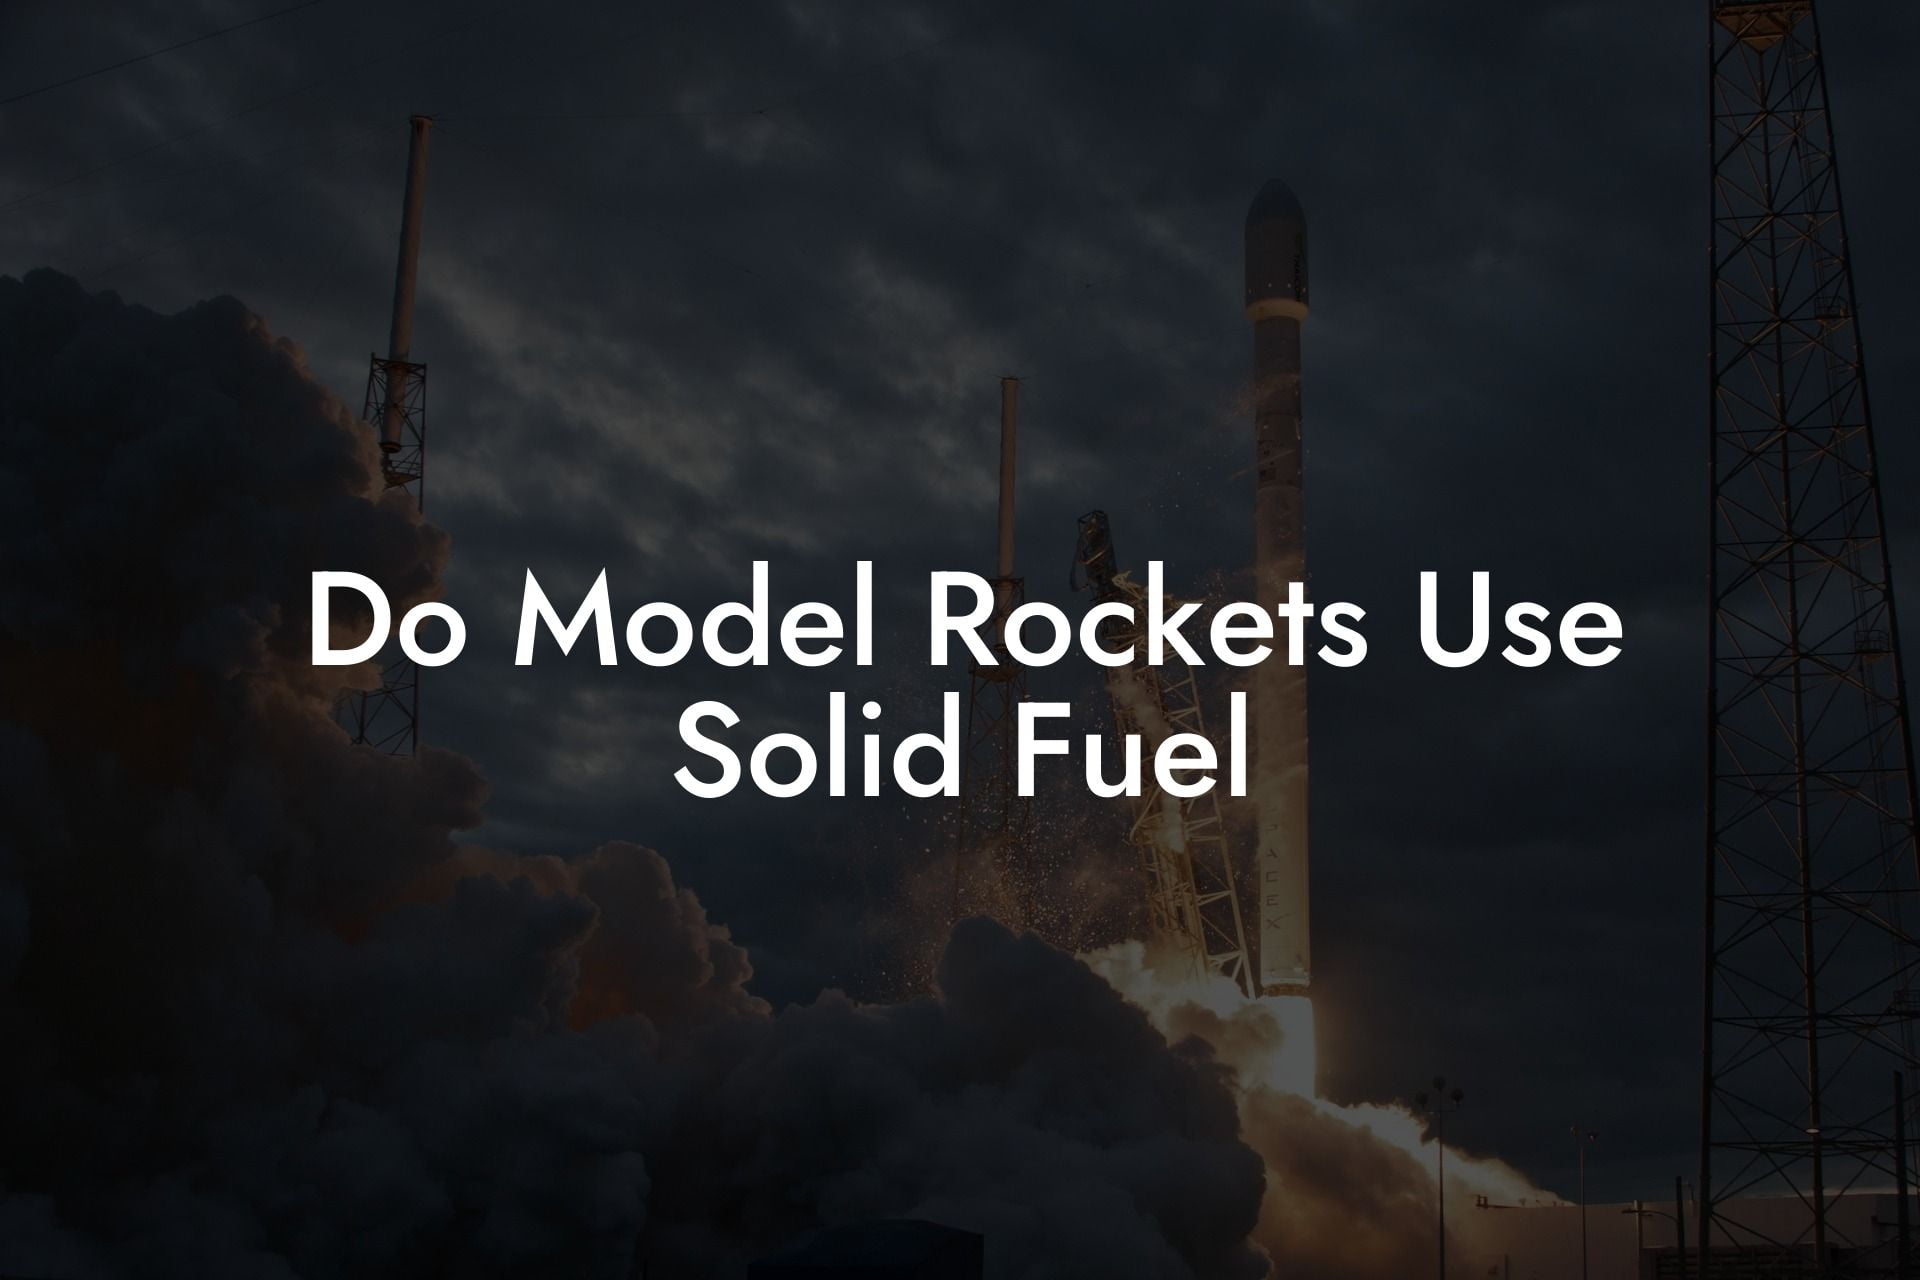 Do Model Rockets Use Solid Fuel